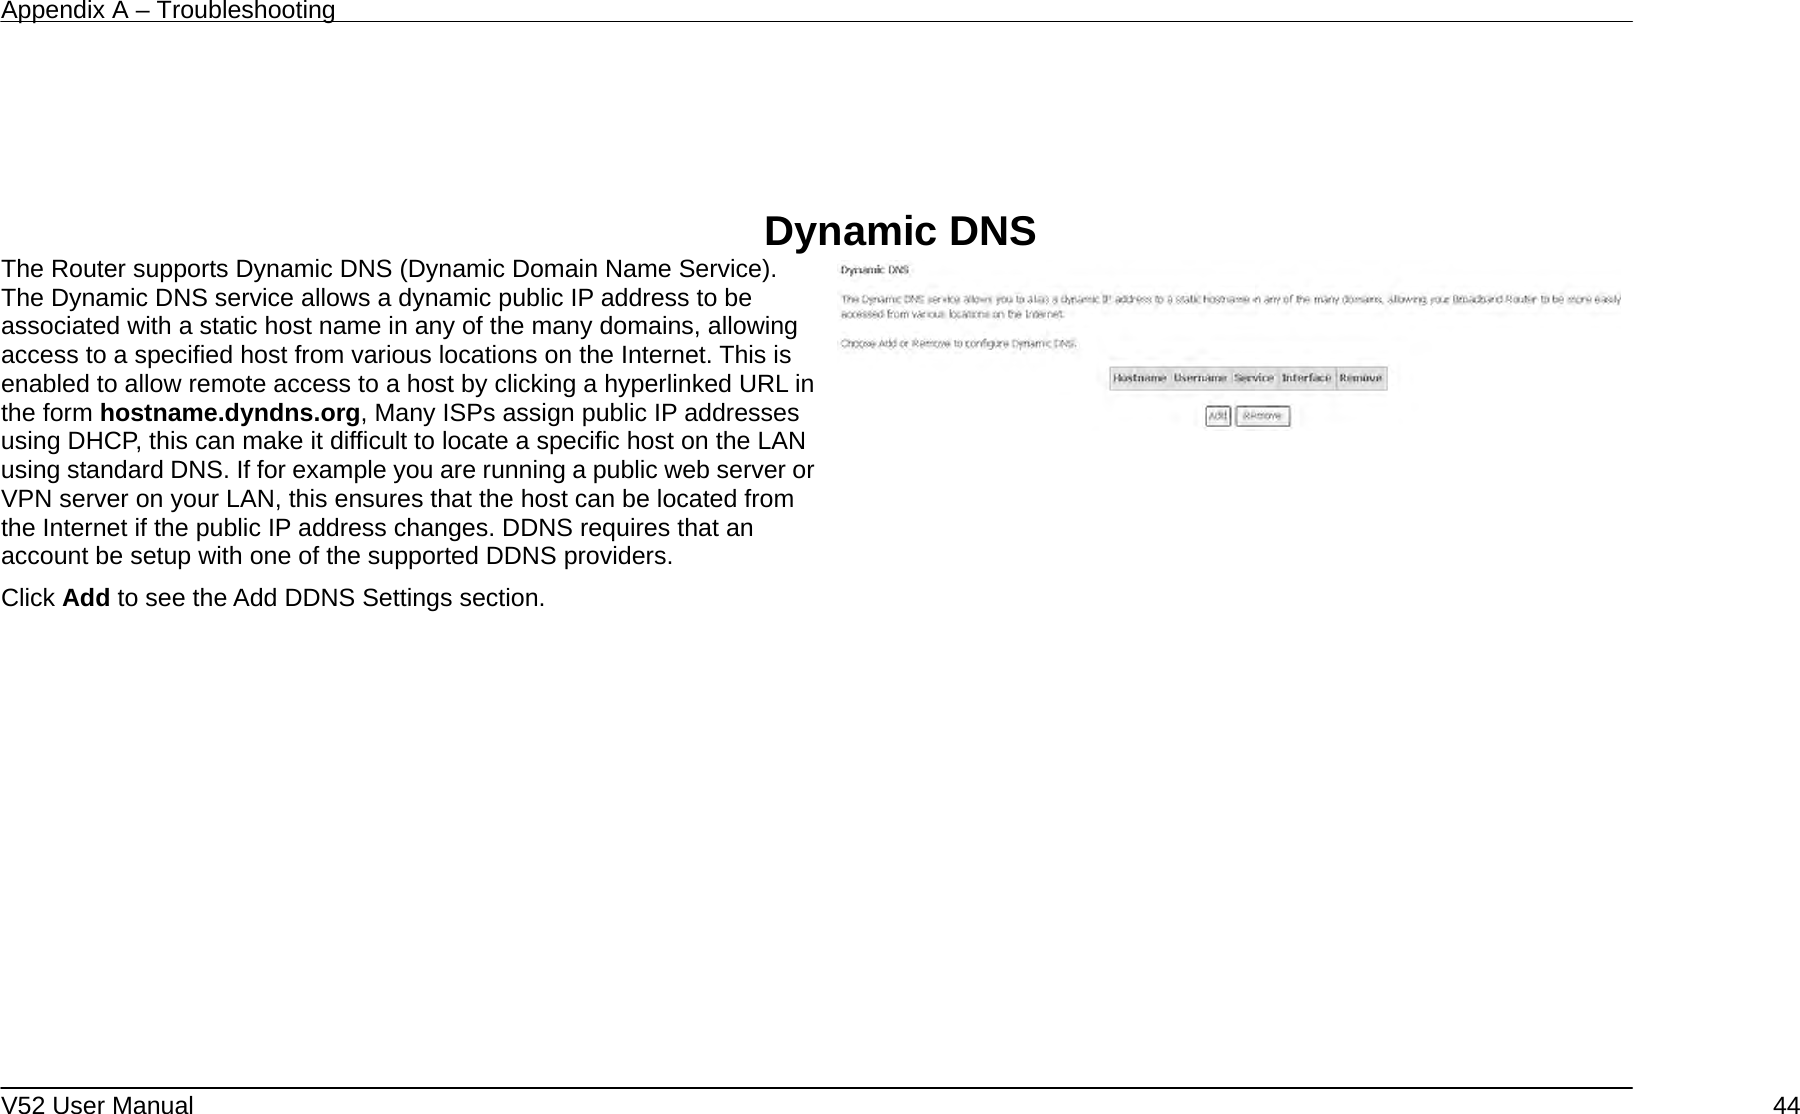 Appendix A – Troubleshooting   V52 User Manual    44    Dynamic DNS The Router supports Dynamic DNS (Dynamic Domain Name Service). The Dynamic DNS service allows a dynamic public IP address to be associated with a static host name in any of the many domains, allowing access to a specified host from various locations on the Internet. This is enabled to allow remote access to a host by clicking a hyperlinked URL in the form hostname.dyndns.org, Many ISPs assign public IP addresses using DHCP, this can make it difficult to locate a specific host on the LAN using standard DNS. If for example you are running a public web server or VPN server on your LAN, this ensures that the host can be located from the Internet if the public IP address changes. DDNS requires that an account be setup with one of the supported DDNS providers. Click Add to see the Add DDNS Settings section.       